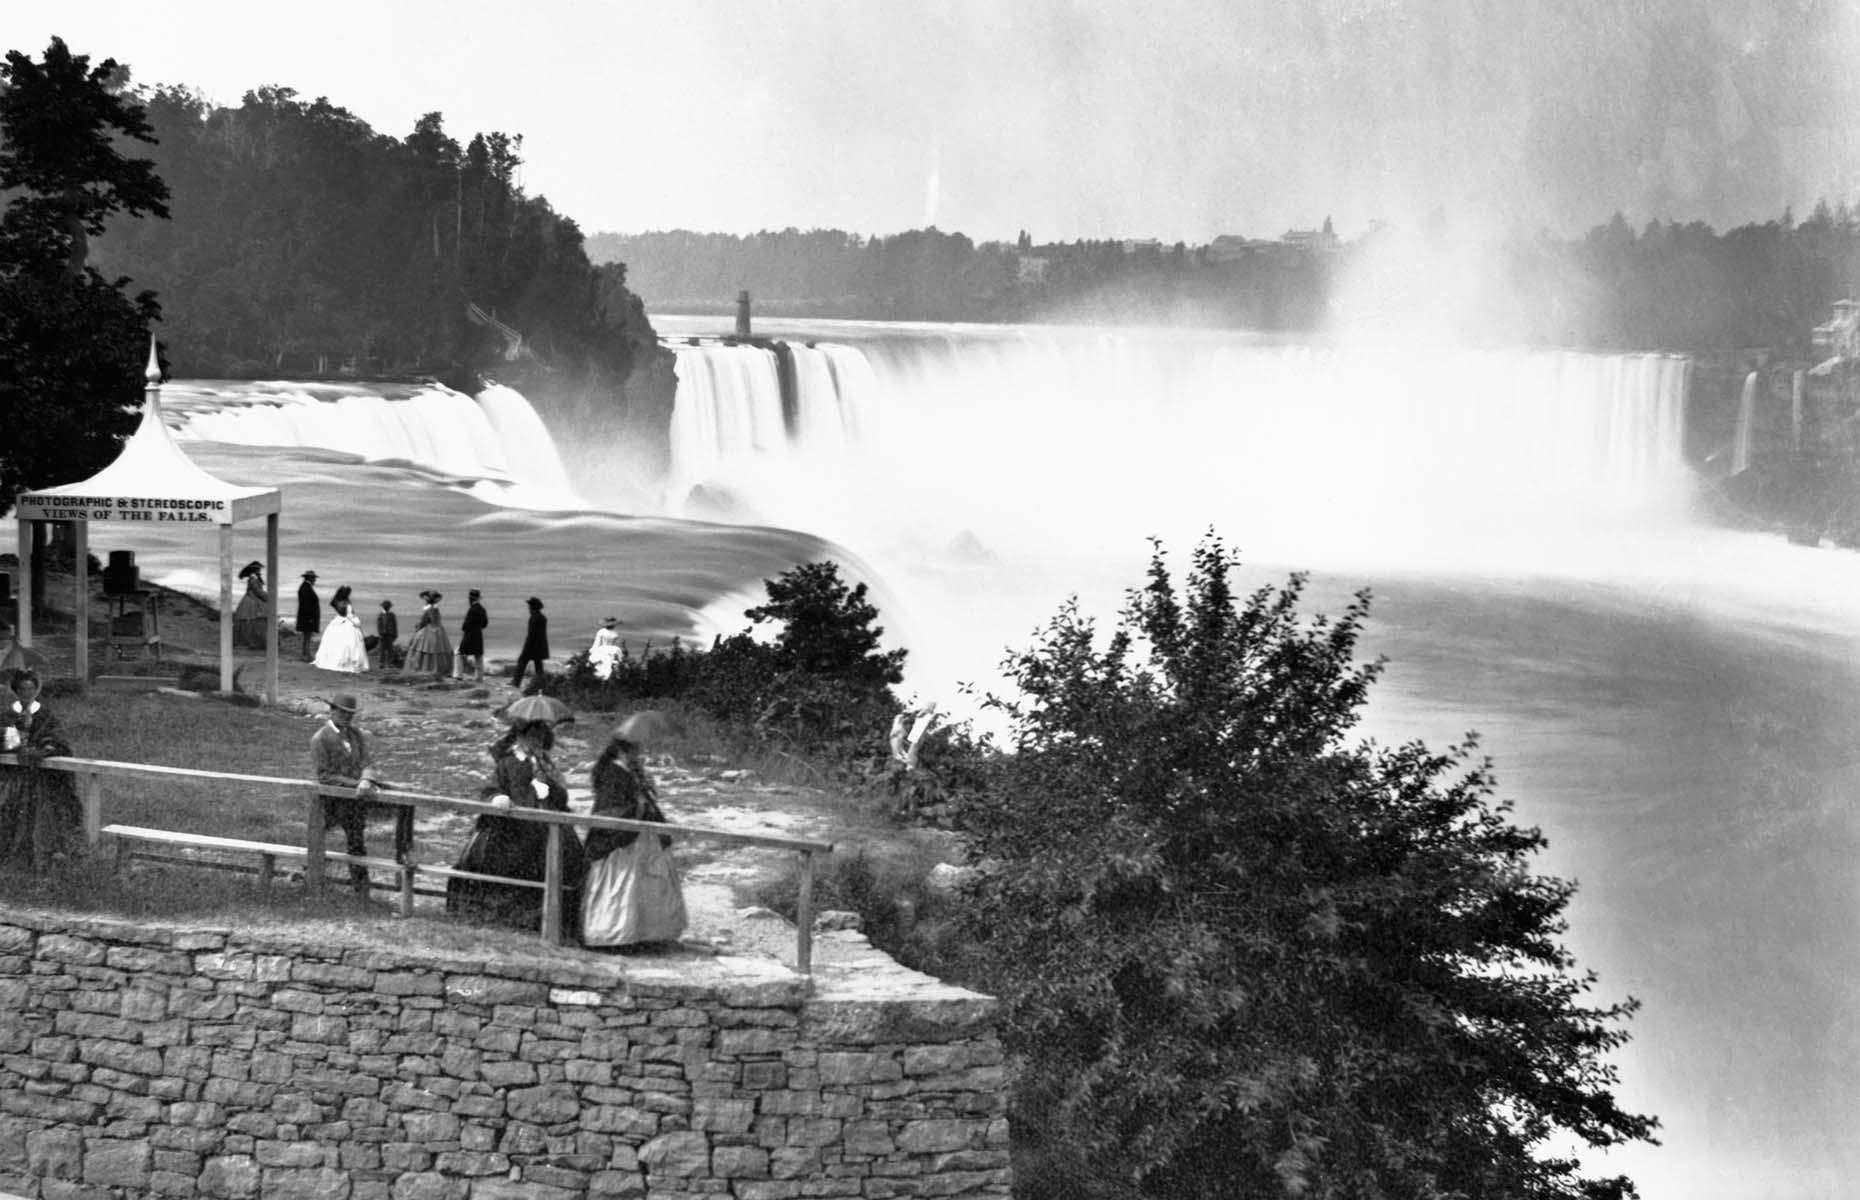 Ocean liners were also ferrying travelers from Europe to the US, with plenty of wealthy Europeans keen to experience the wonders of the New World. Many vacationed in New York City before venturing further, to see natural marvels like Niagara Falls on the border with Ontario, Canada. Here, Victorian-era tourists view the tumbling white waters from a nearby observation point in 1859.